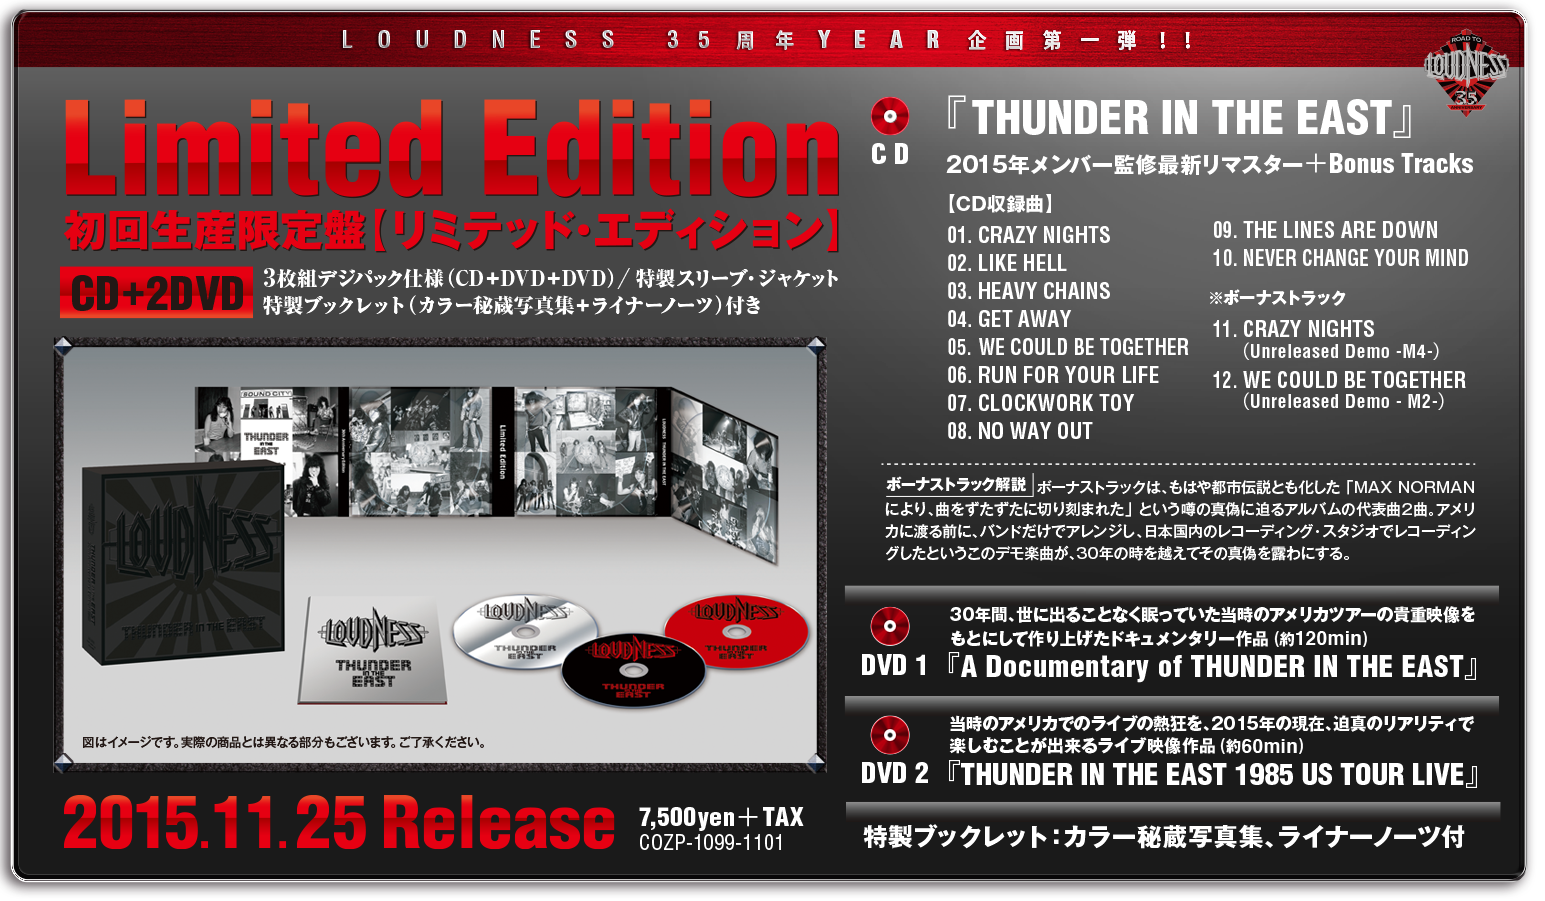 LOUDNESS『THUNDER IN THE EAST』30周年 公式サイト